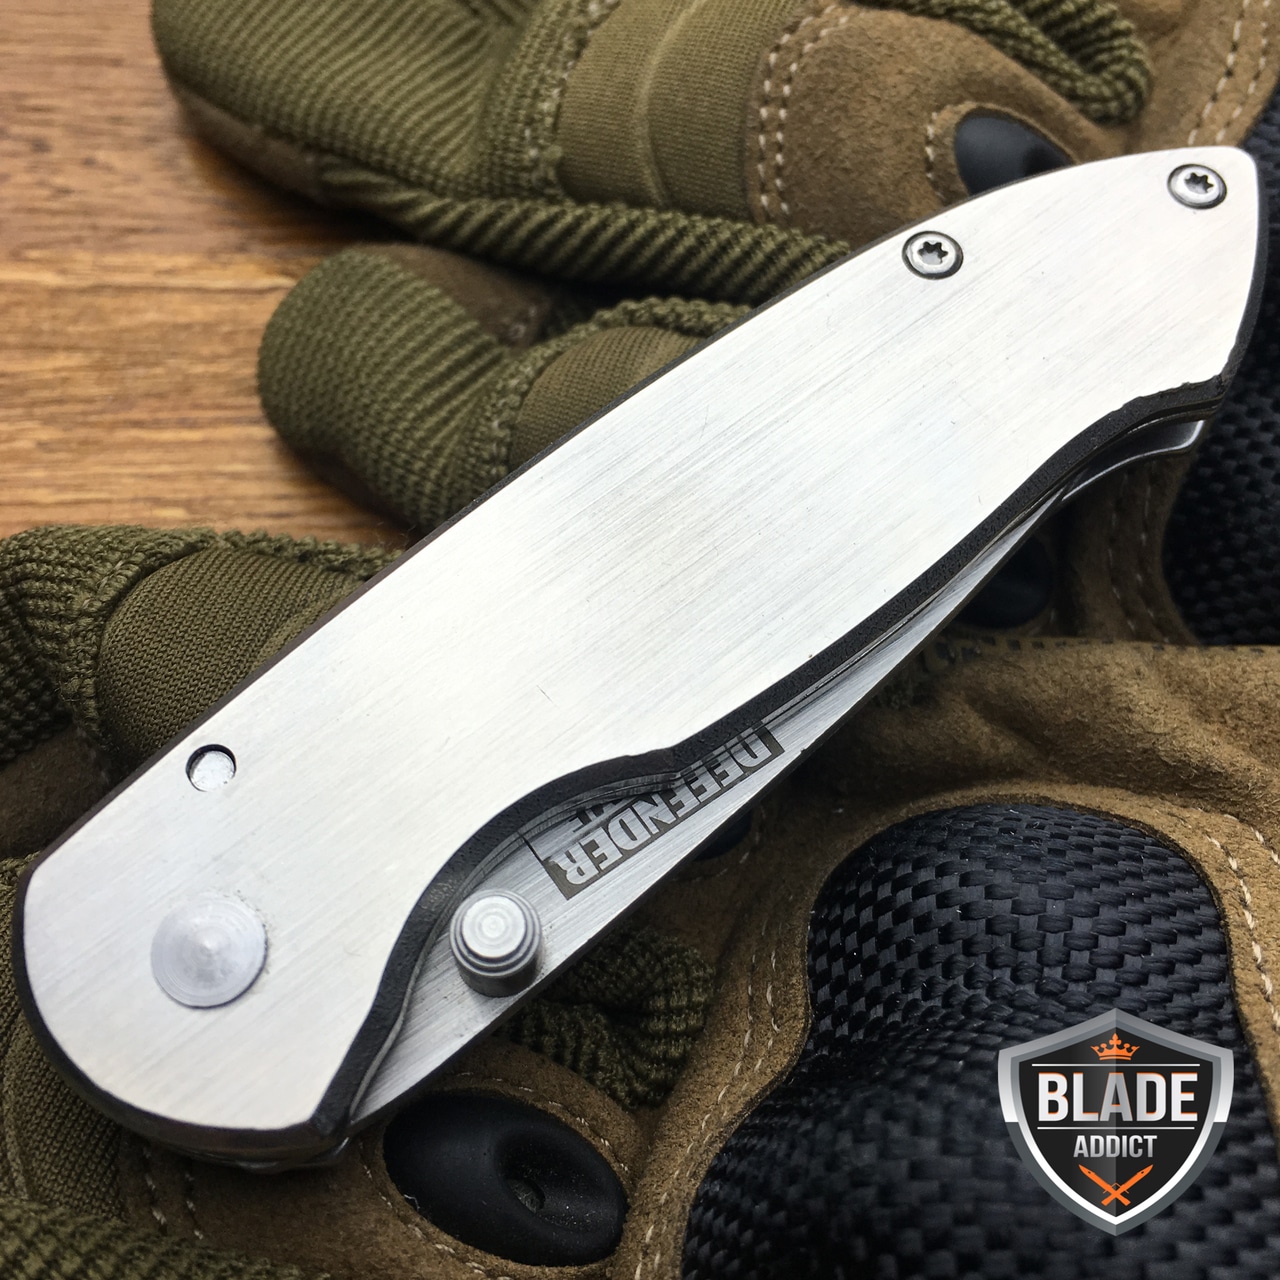 6.5" FULL STAINLESS STEEL TACTICAL COMBAT SPRING ASSISTED OPEN POCKET KNIFE EDC